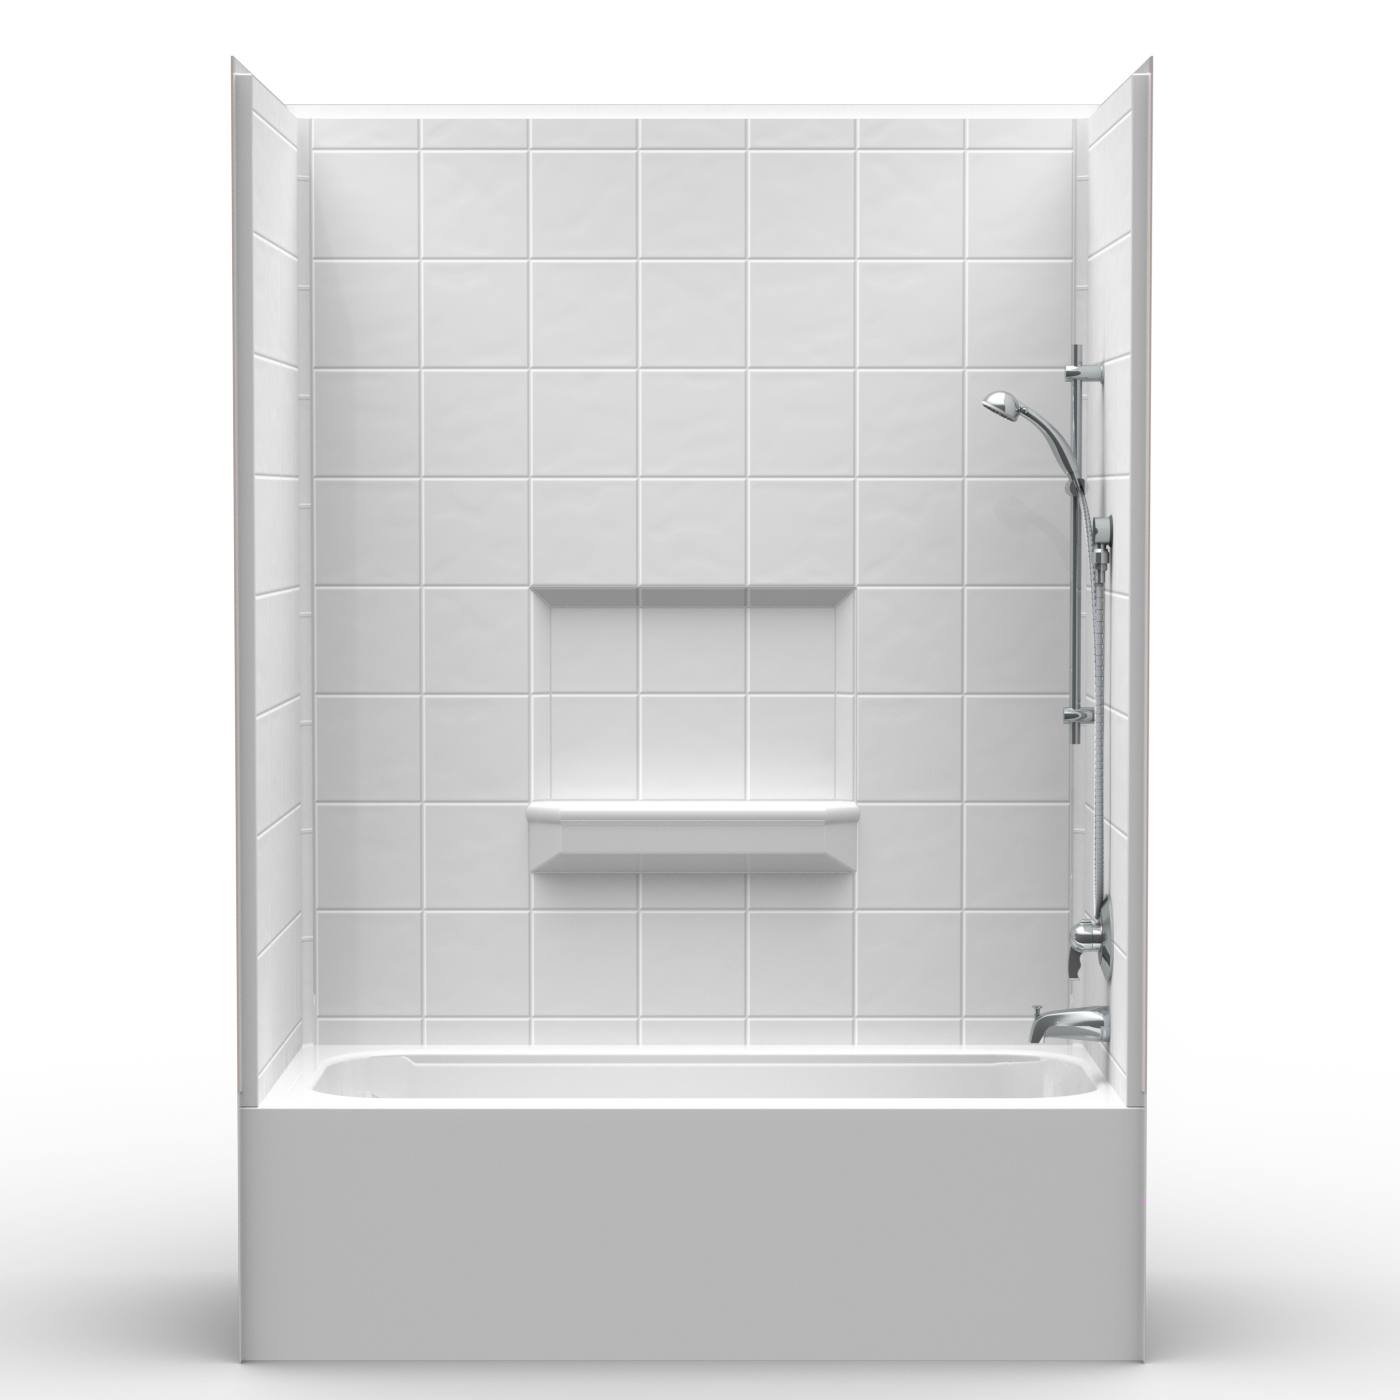 60 X 30 85 Tub Shower Combo, Pictures Of Bathtub Shower Combo